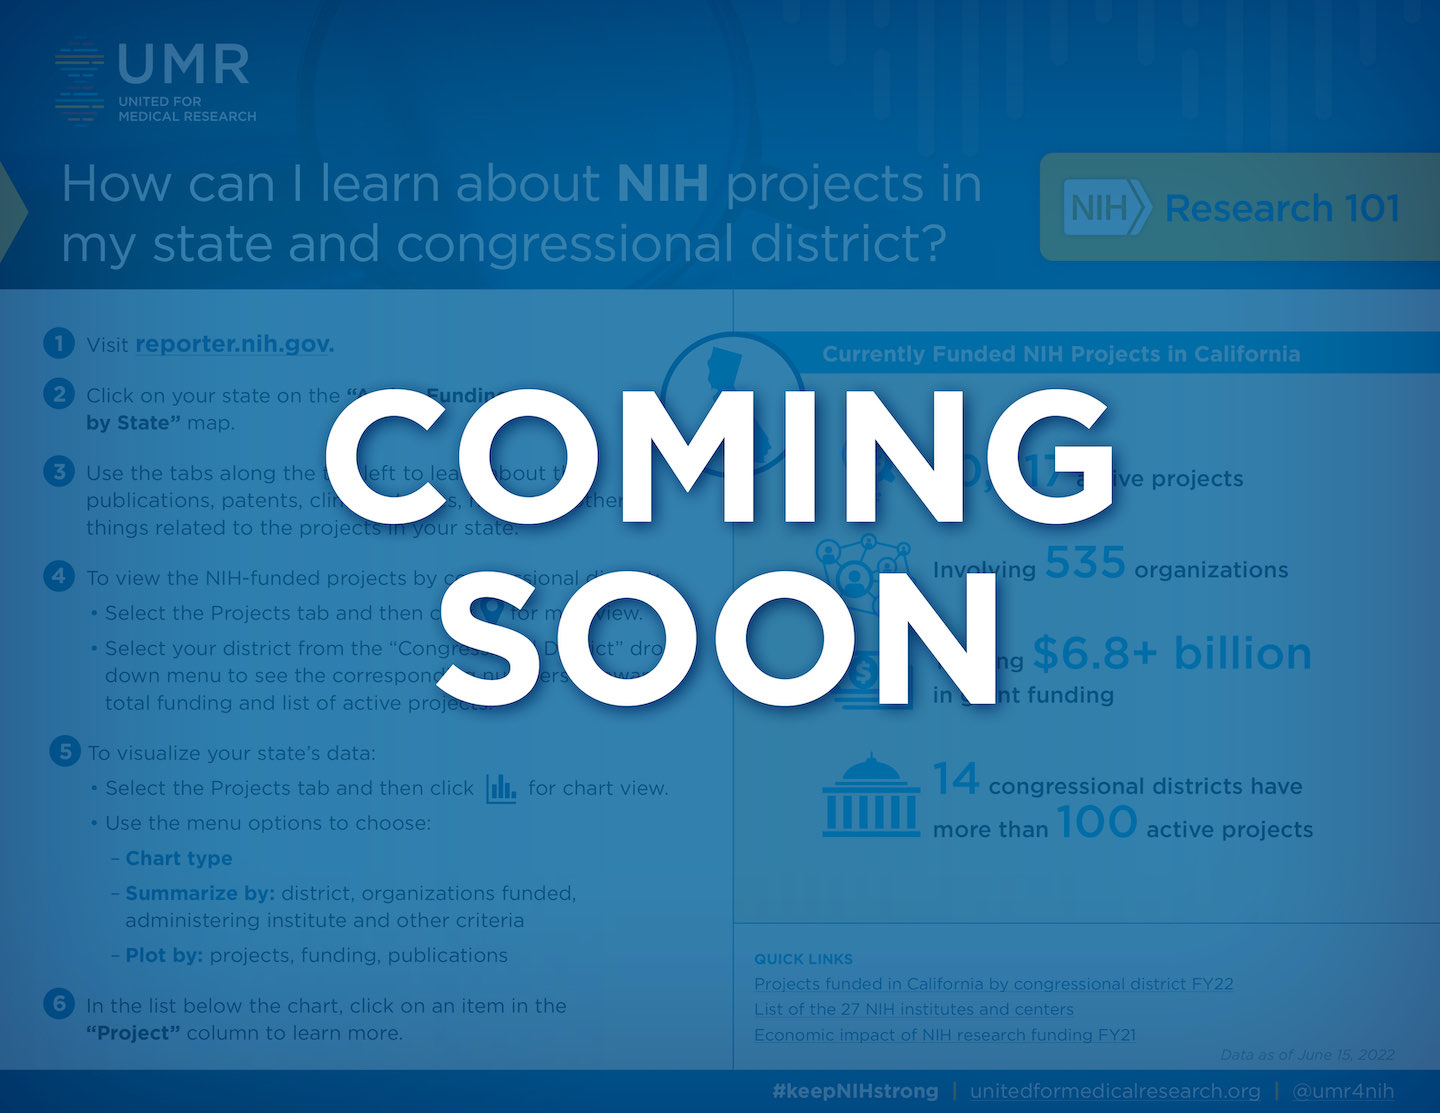 NIH-Research-101-Fact-Sheet-Series-States-Coming-Soon